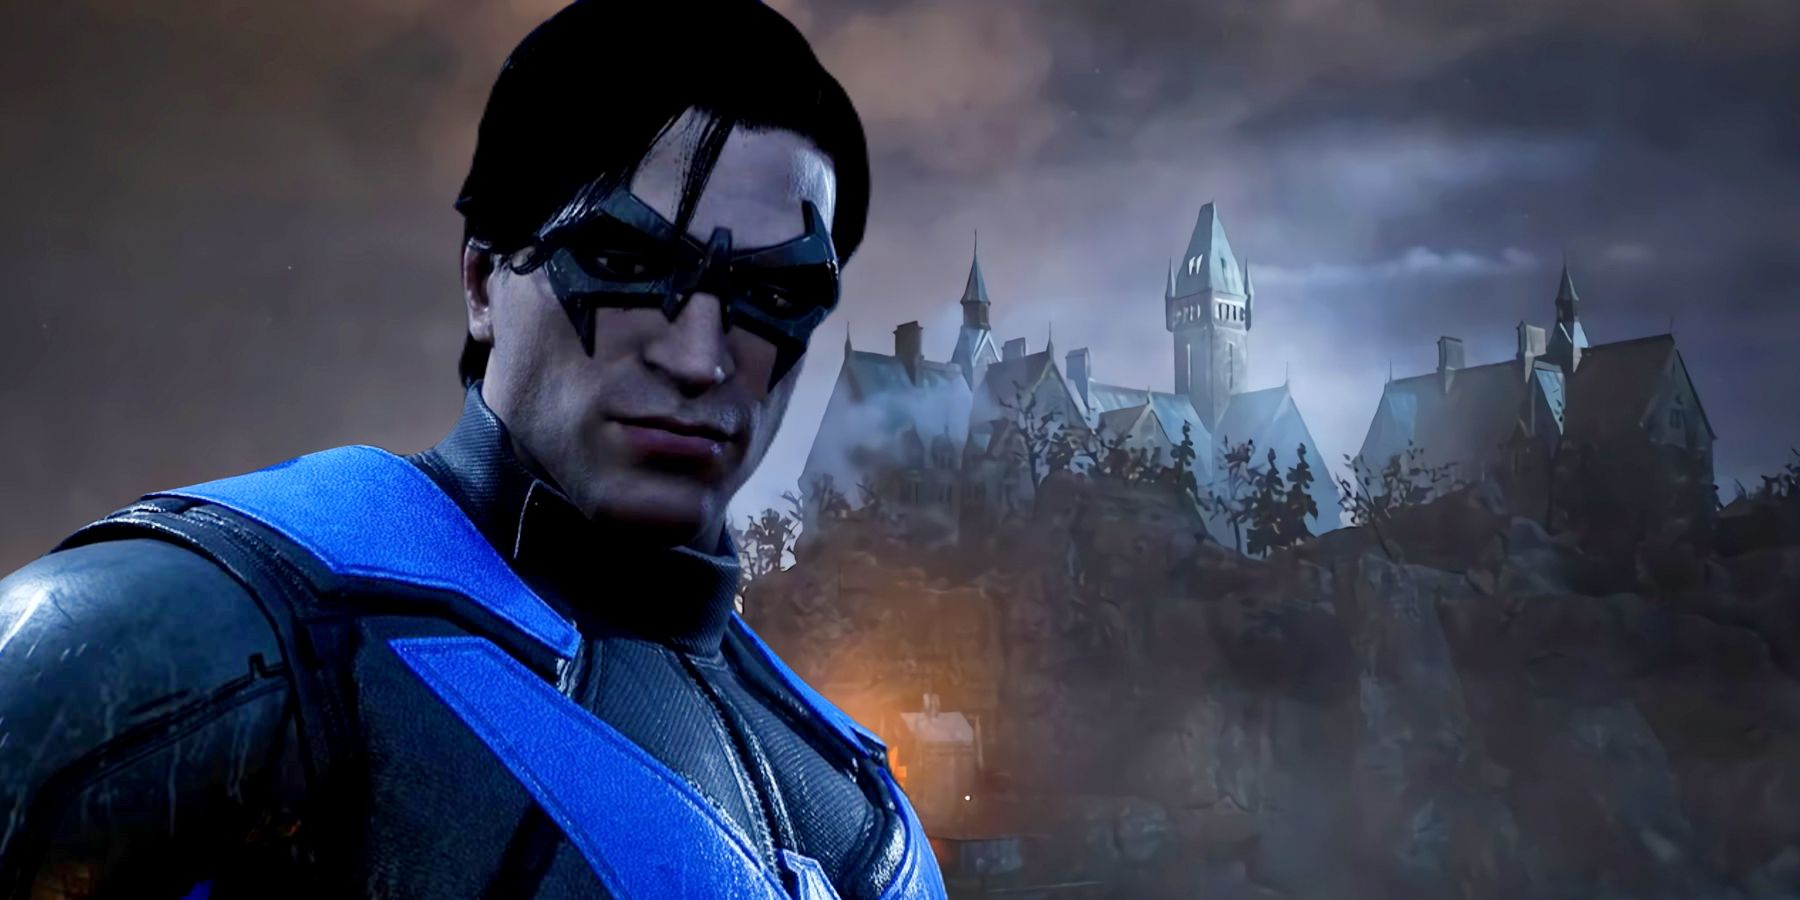 Gotham Knights DLC could add this hidden Two-Face villain quest